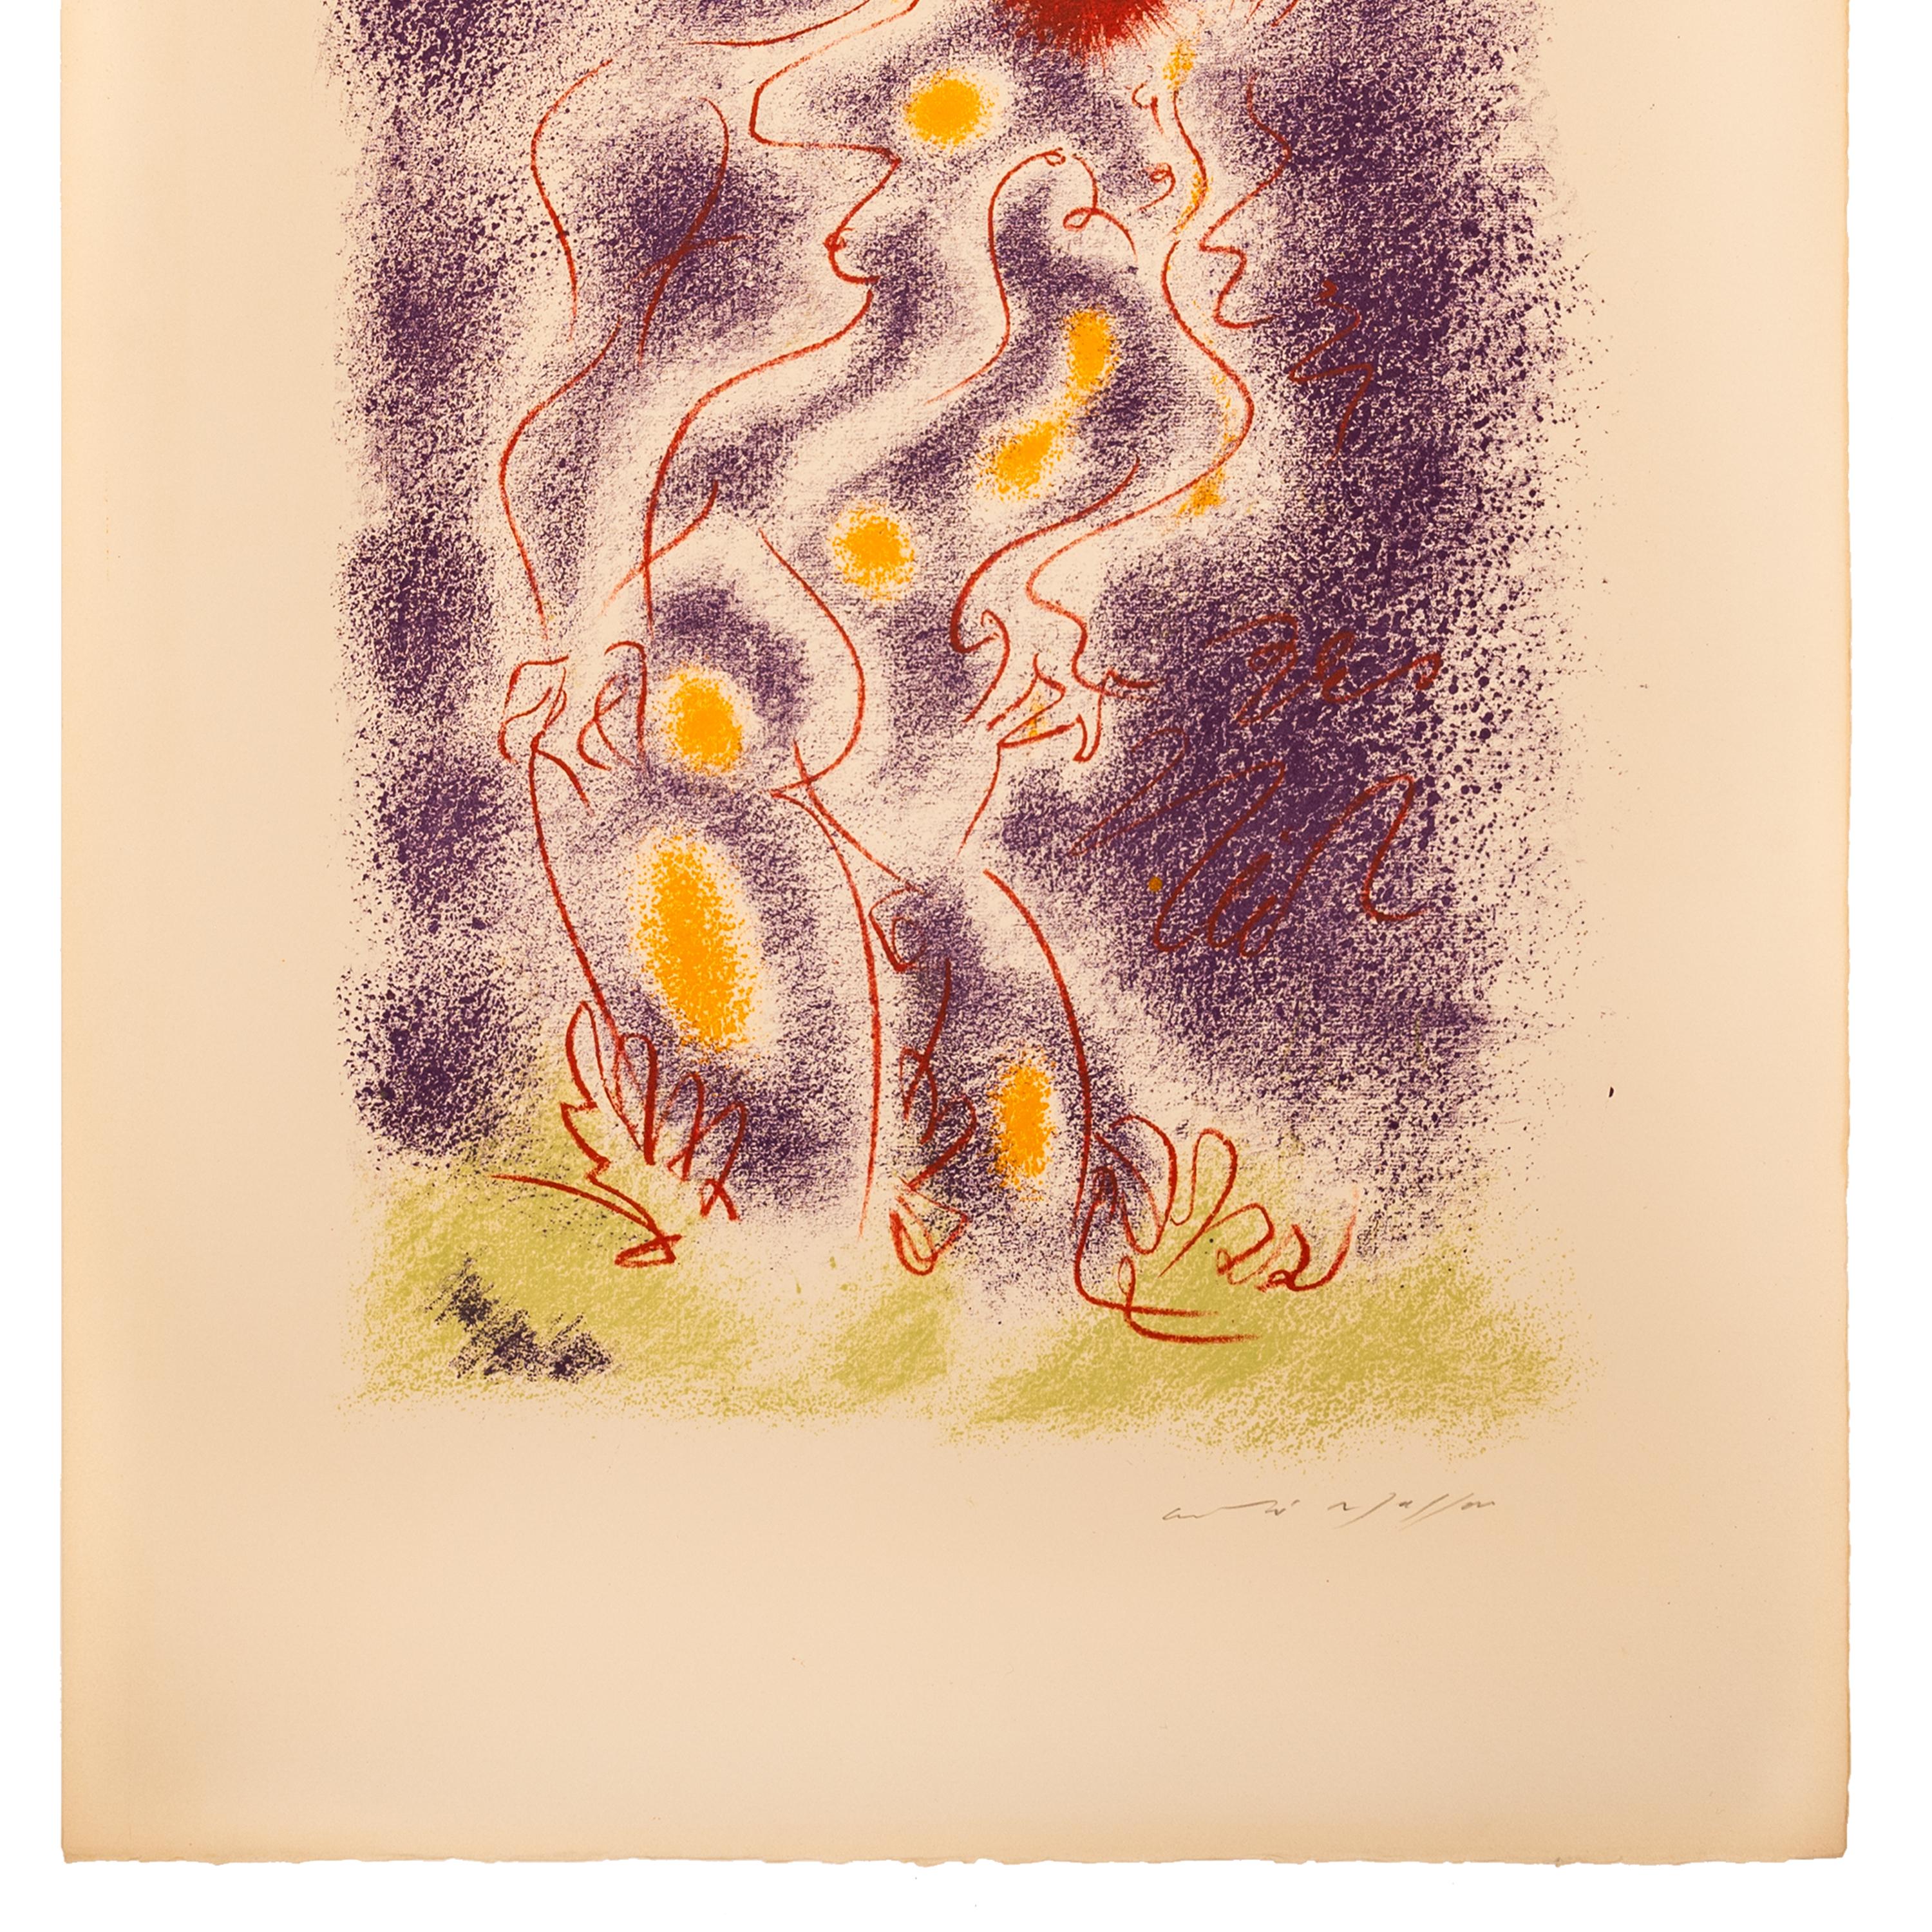 Andre Masson 
Les Amoureux (The Lovers)
Created in 1959, this original color lithograph is hand signed in ink by Andre Masson (1896-1987) in the lower right margin. This is an artist proof  from a numbered edition of 220 on Arches wove paper.